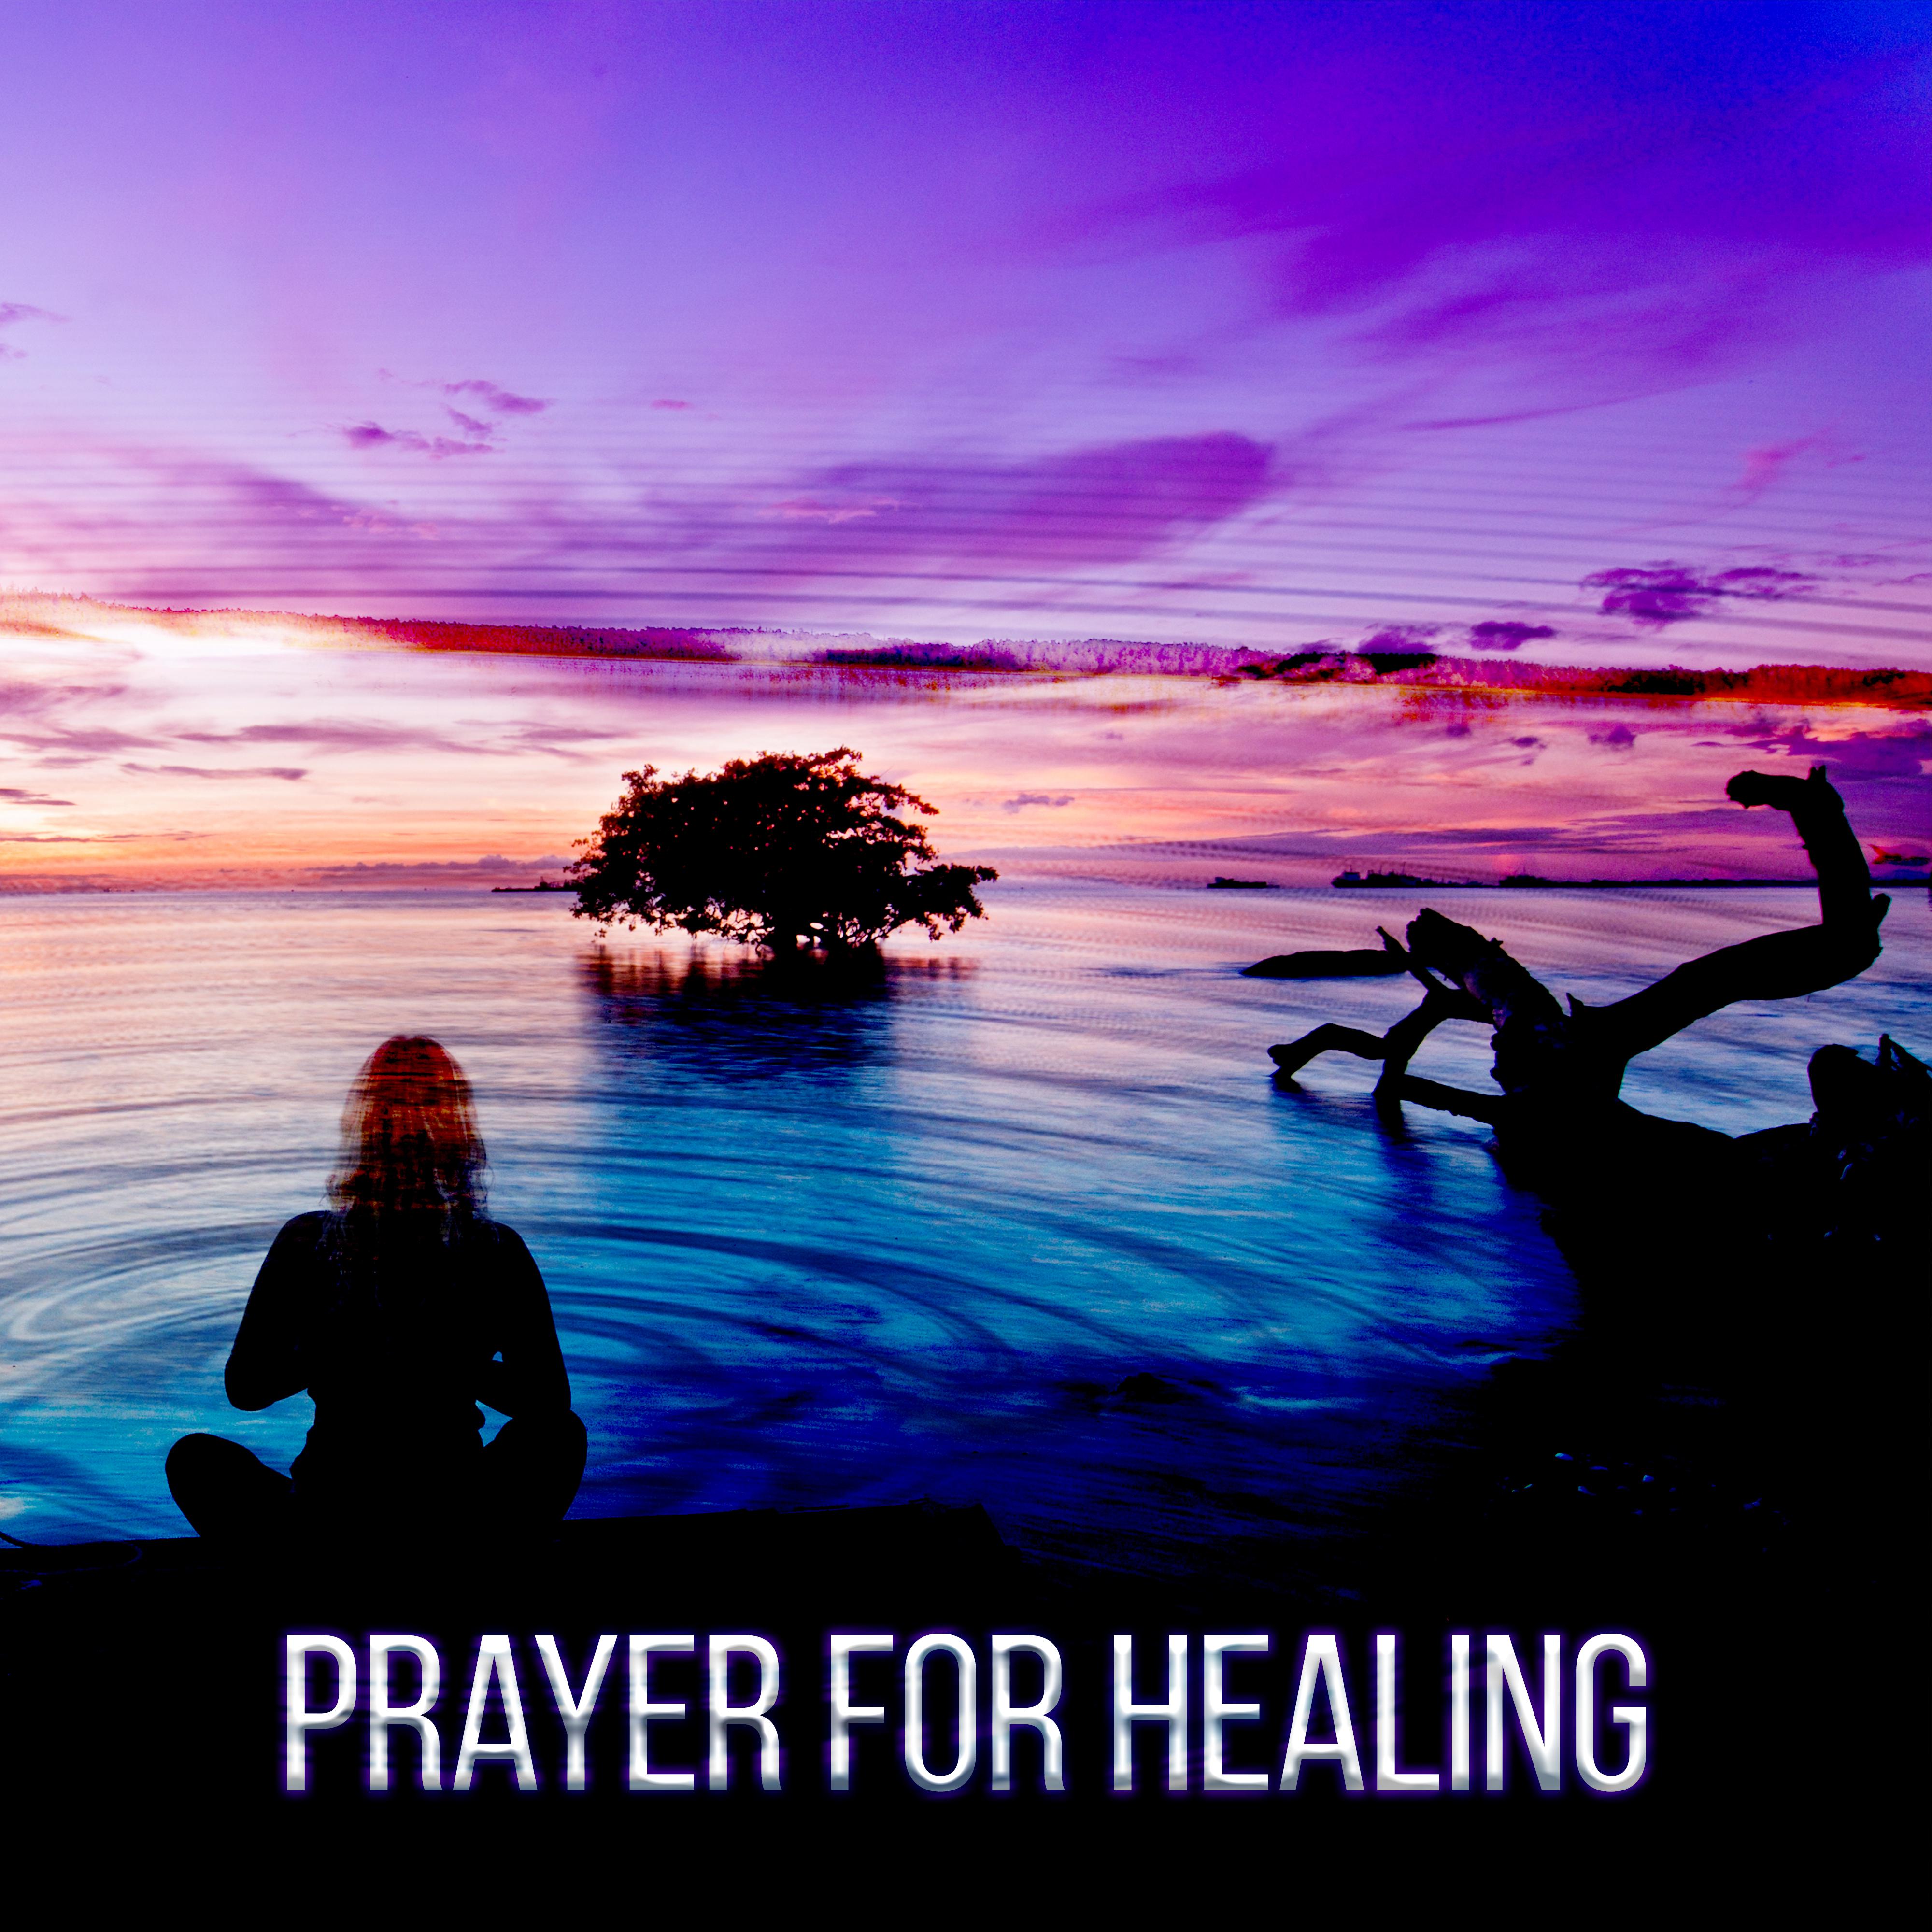 Prayer for Healing - New Age Music to Relax, Healing Sounds to Cure Insomnia, Chanting Om with Yoga Meditation, White Noises for Deep Sleep, Spiritual Reflections, Relaxation and Chill Out